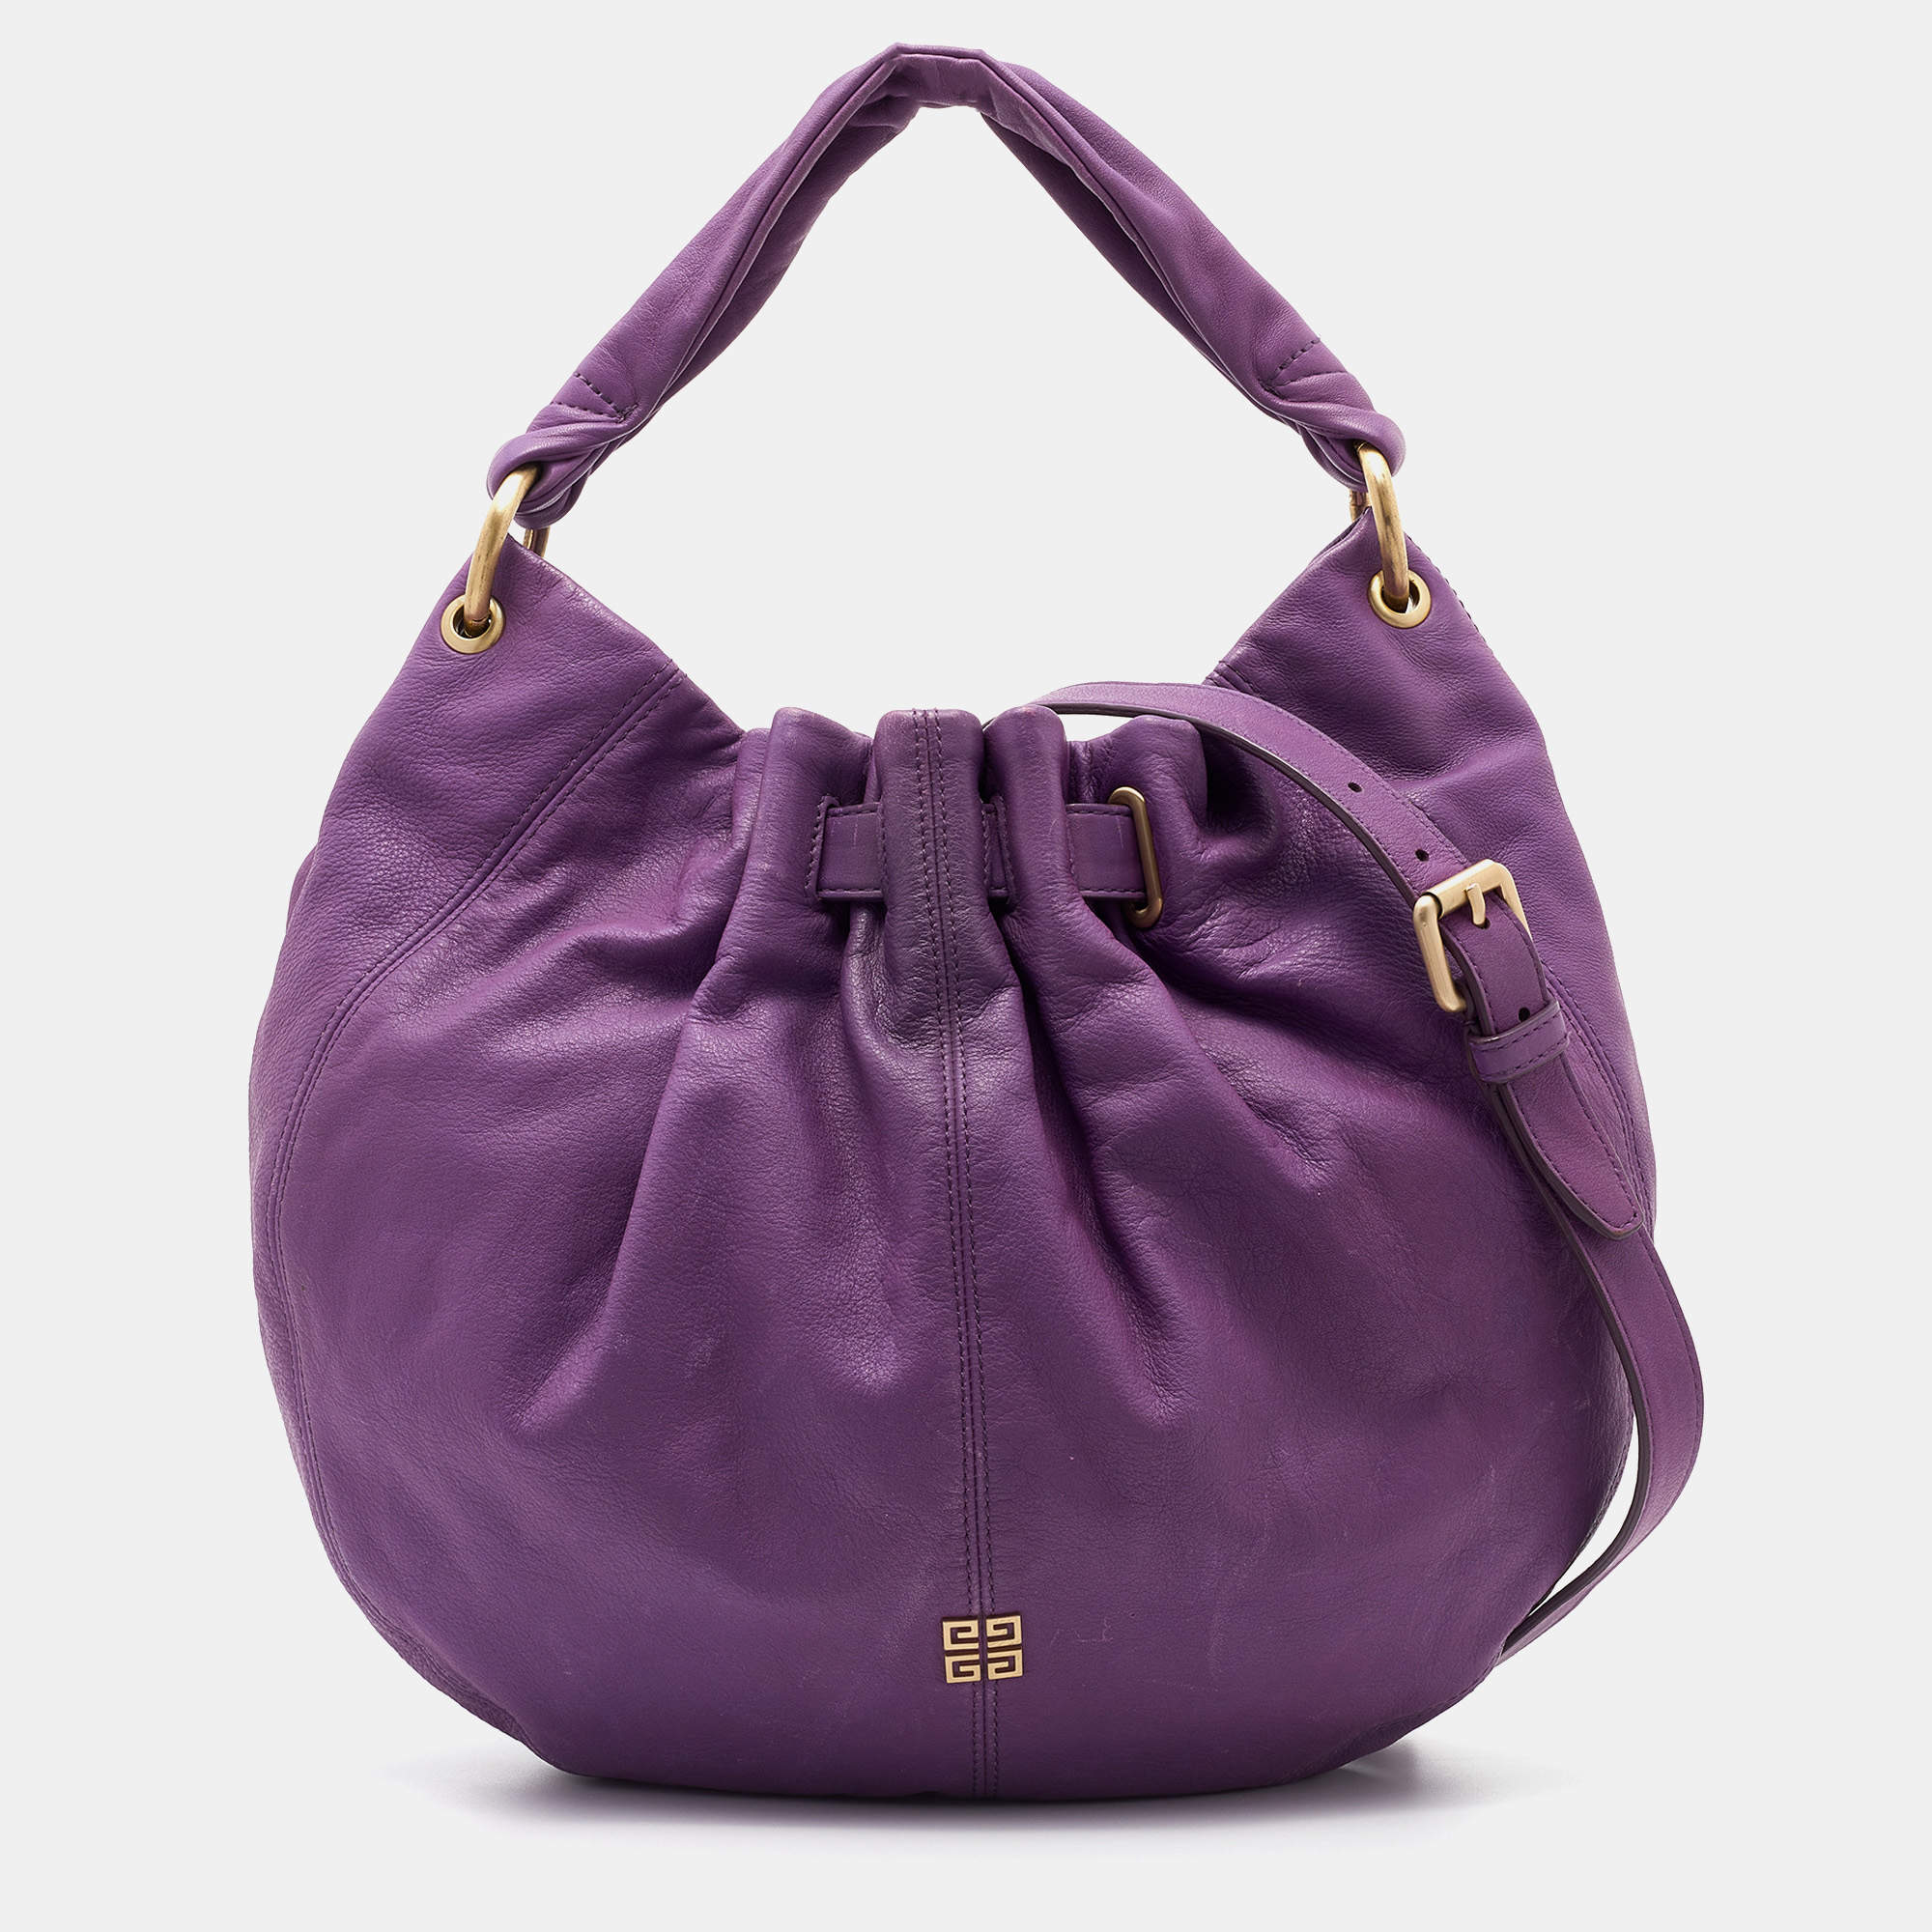 Givenchy Purple Leather Hobo